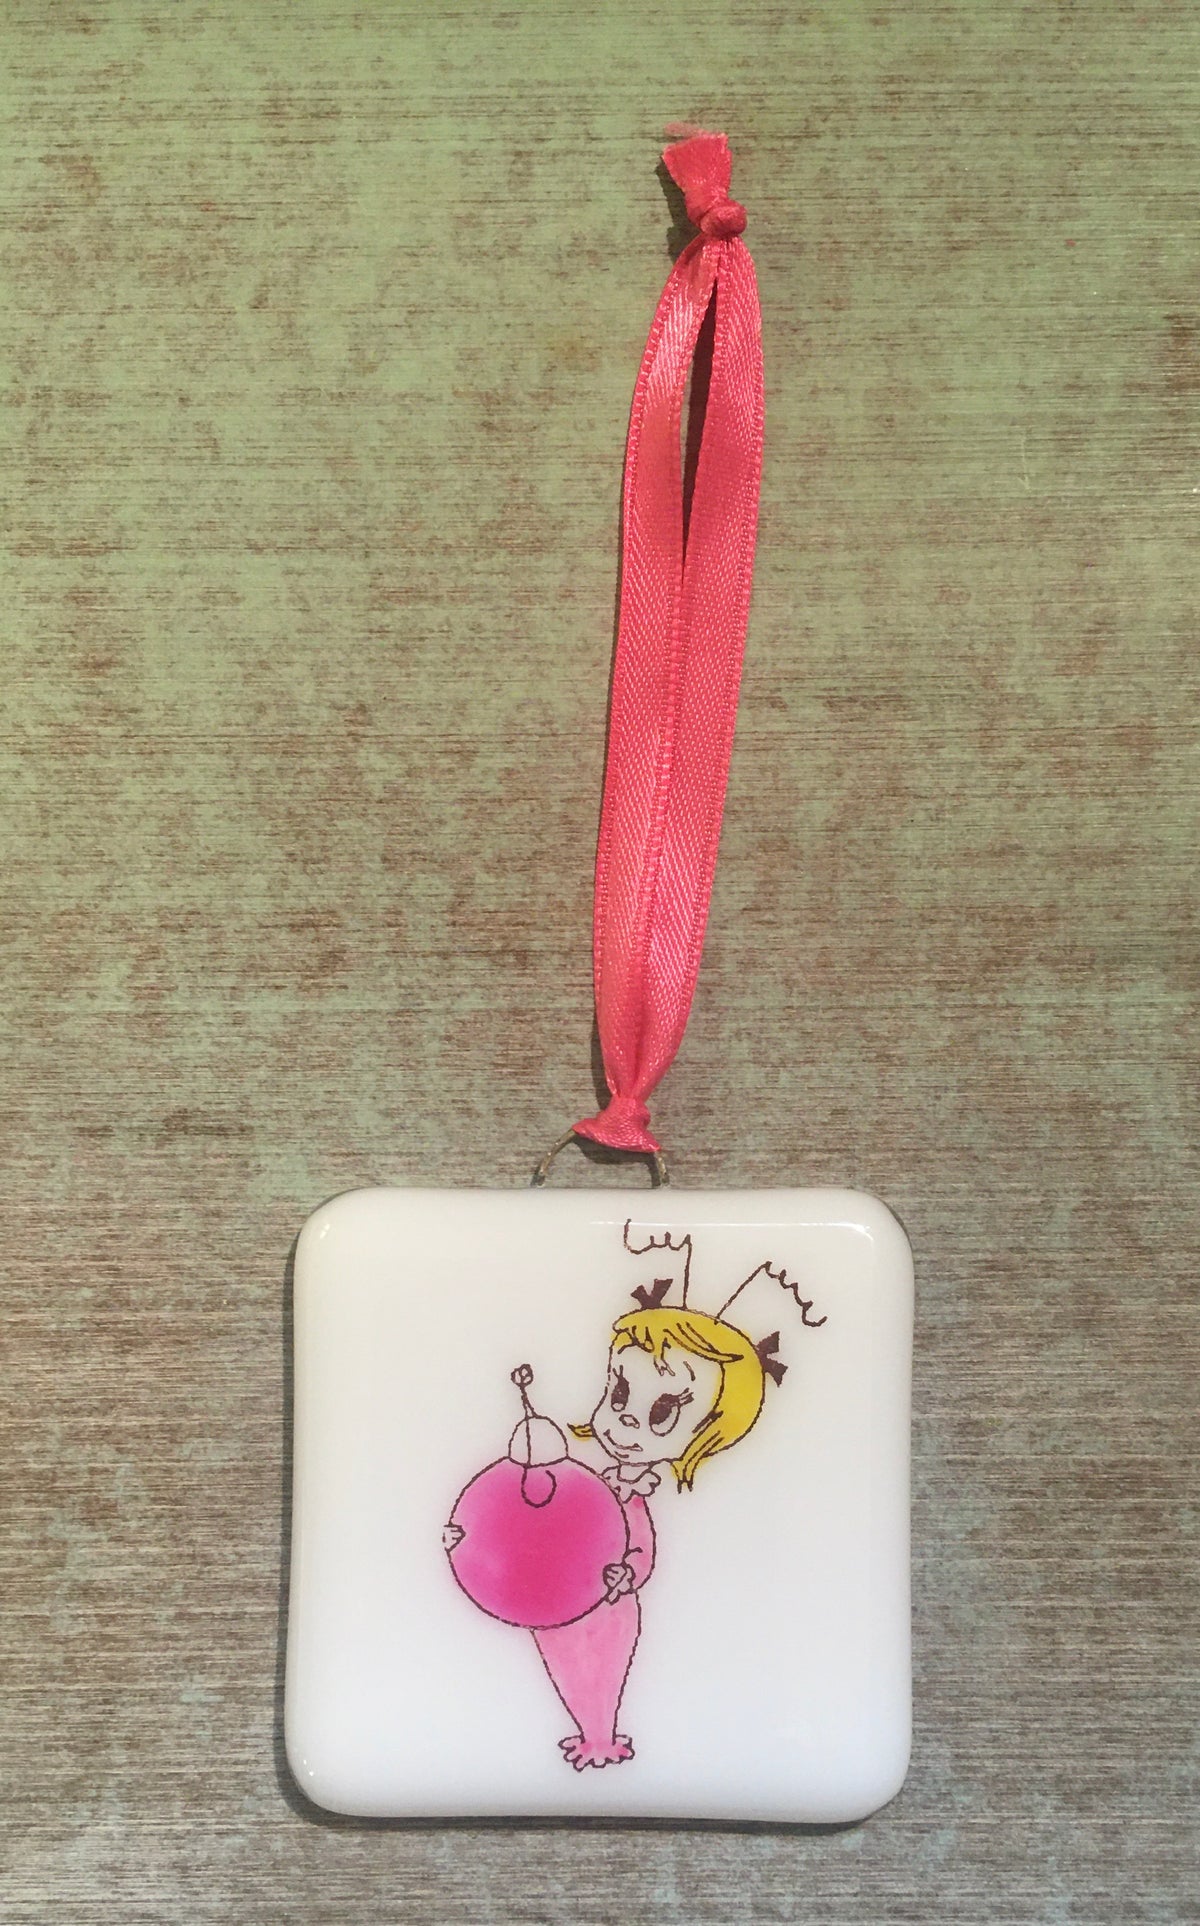 The Grinch - Little Cindy Lou Who Ornament - Hand Painted